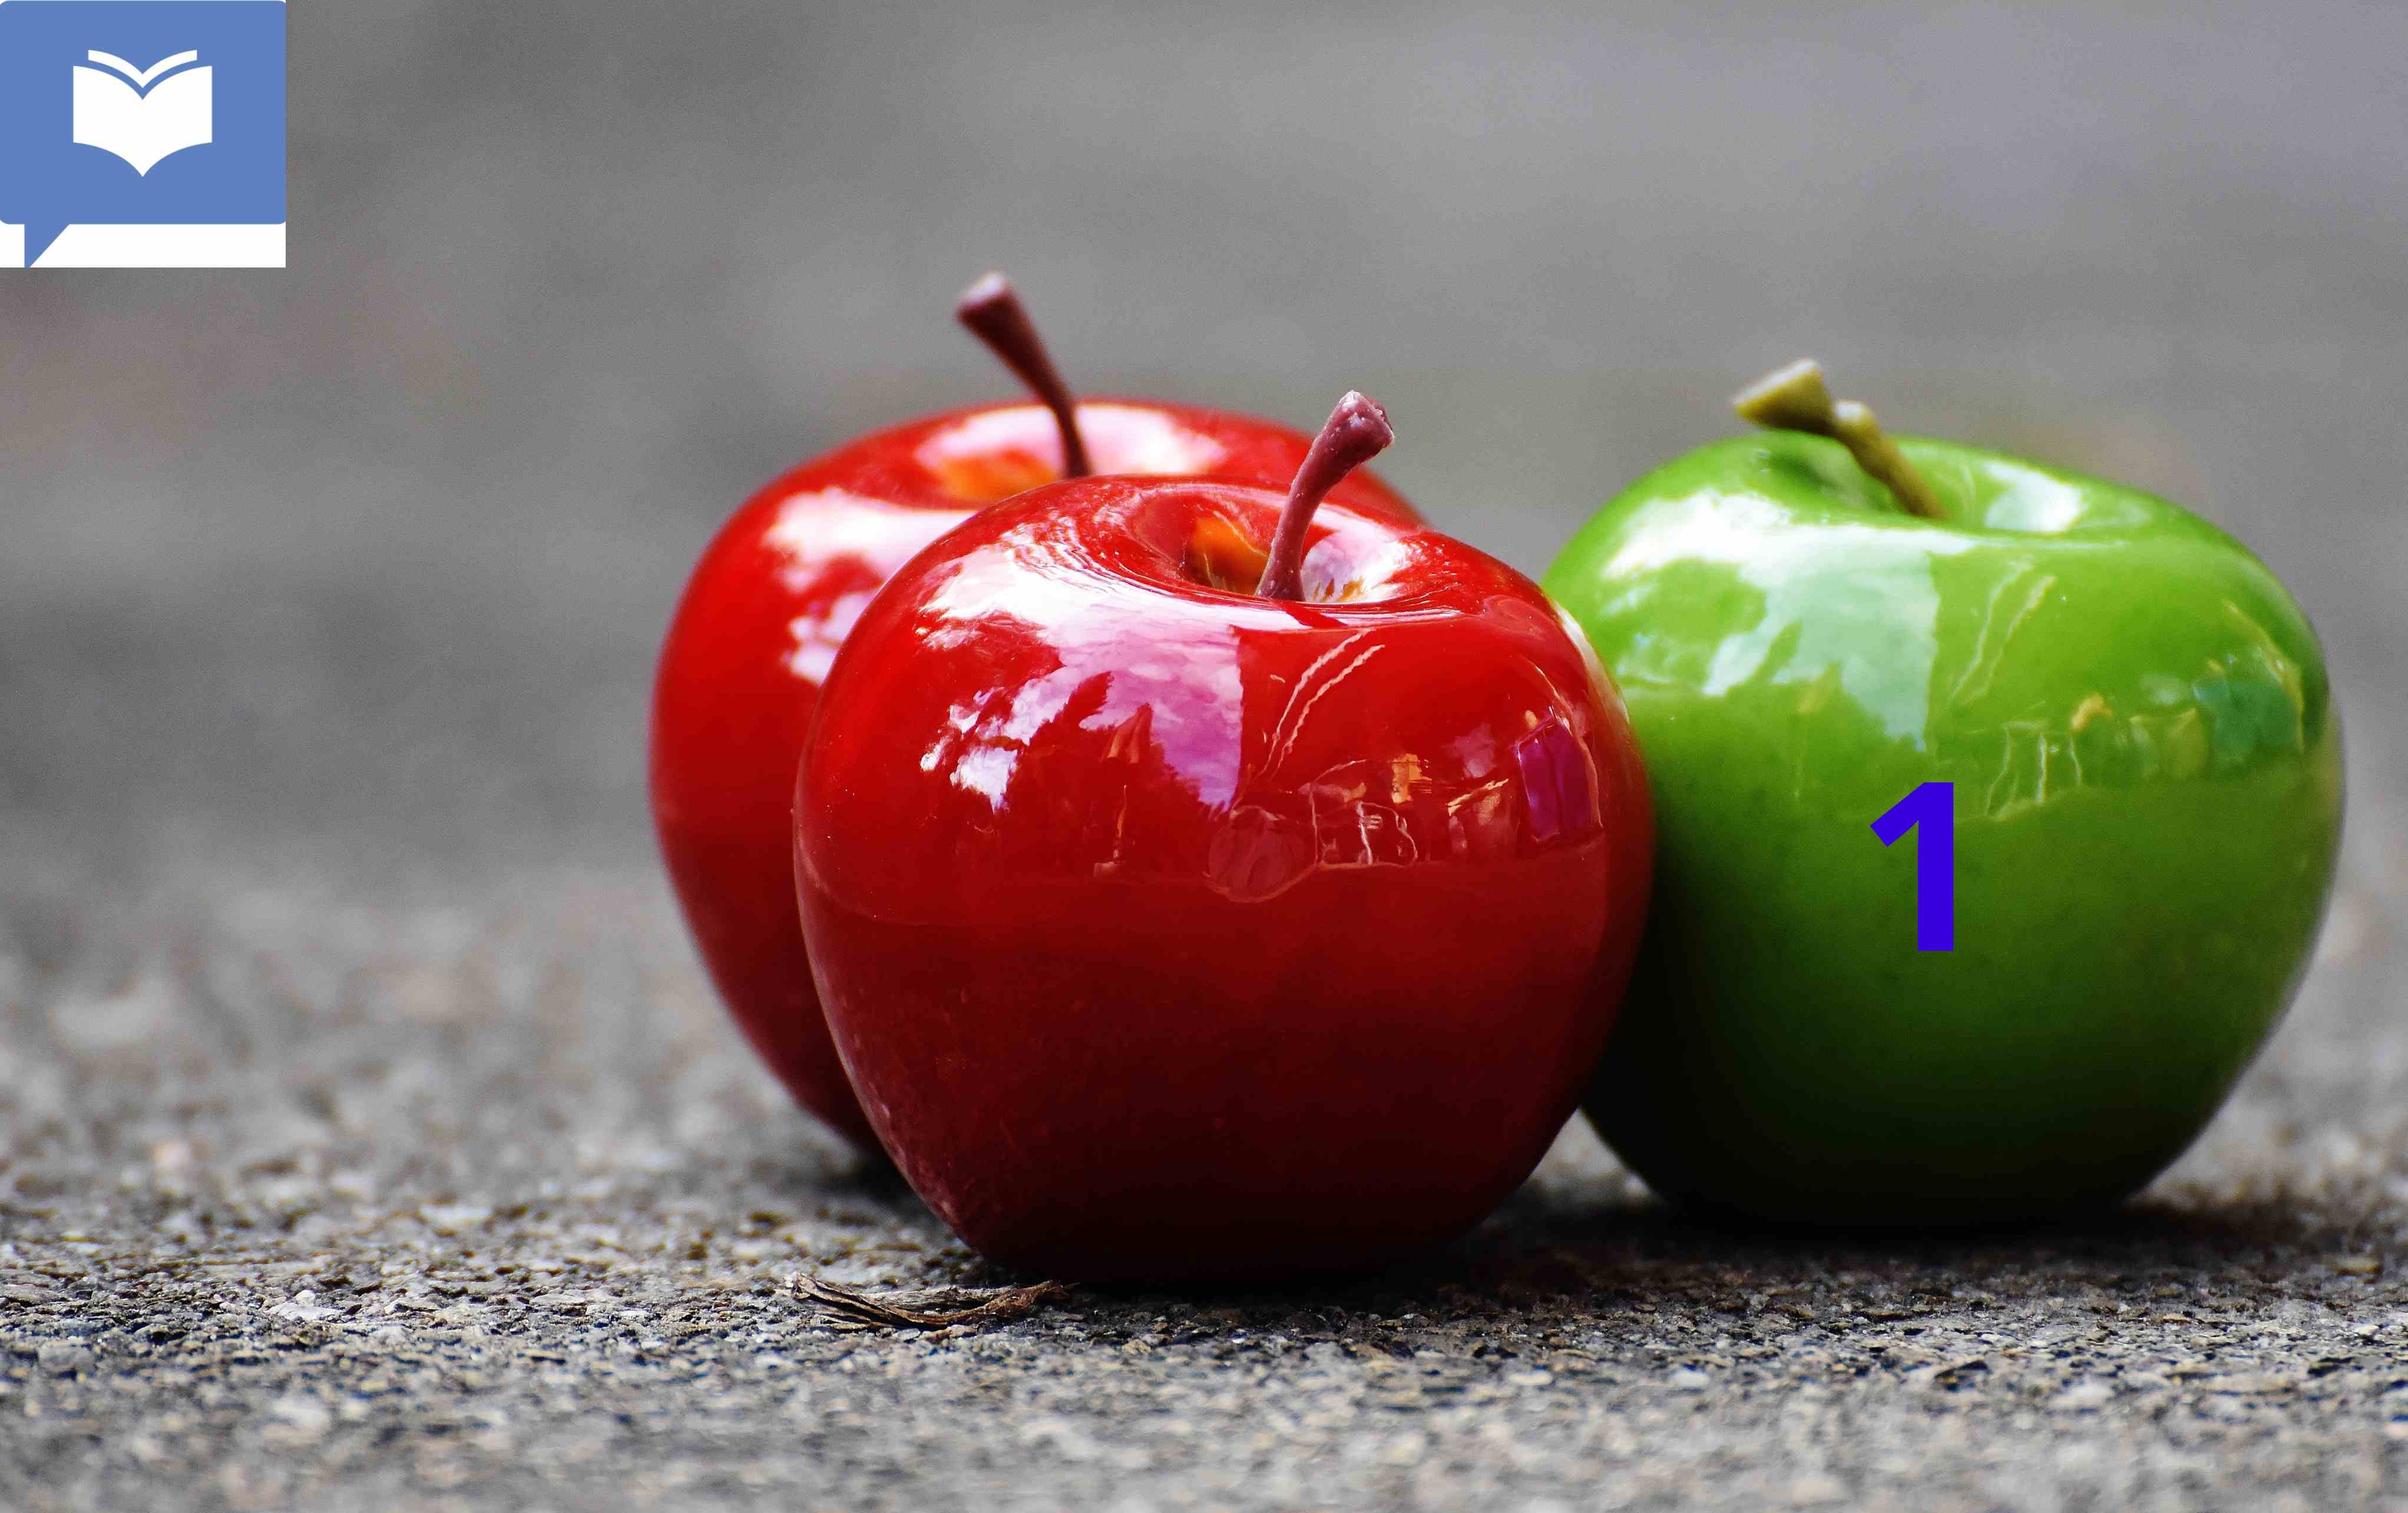 <p>which color is is the apple labelled 1?</p>